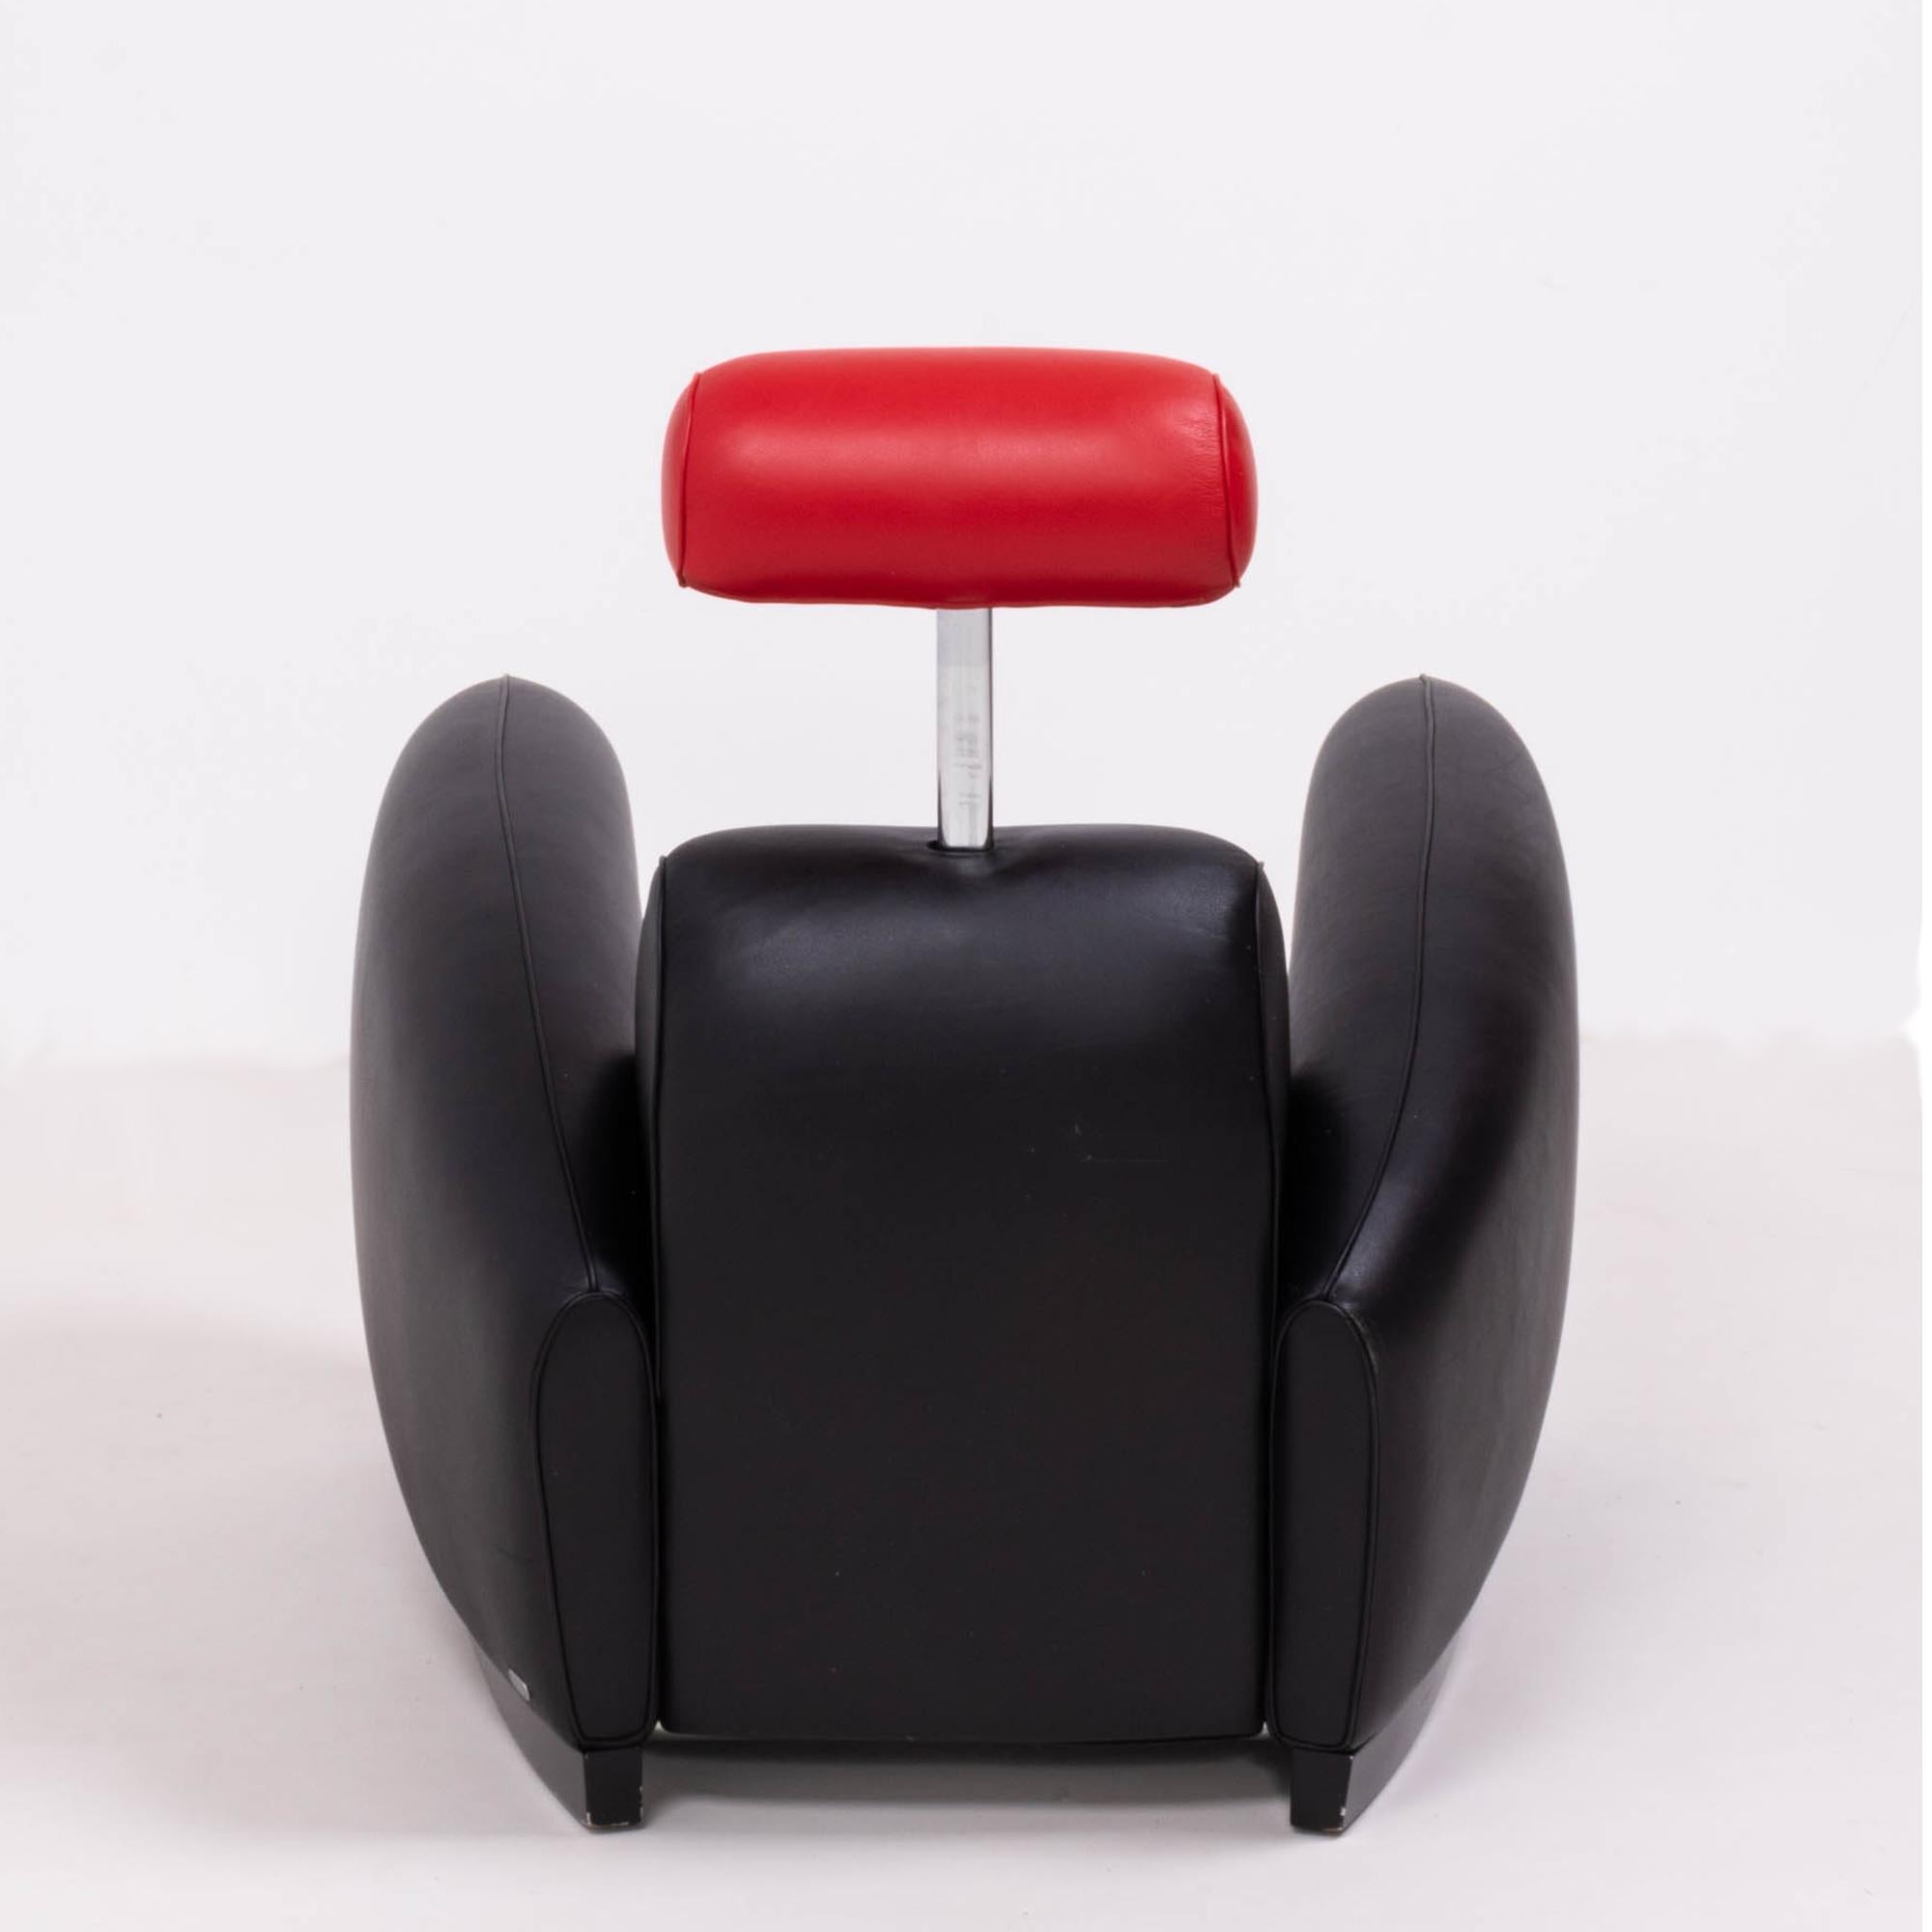 De Sede by Franz Romero DS-57 Black and Red Leather Armchair In Good Condition For Sale In London, GB